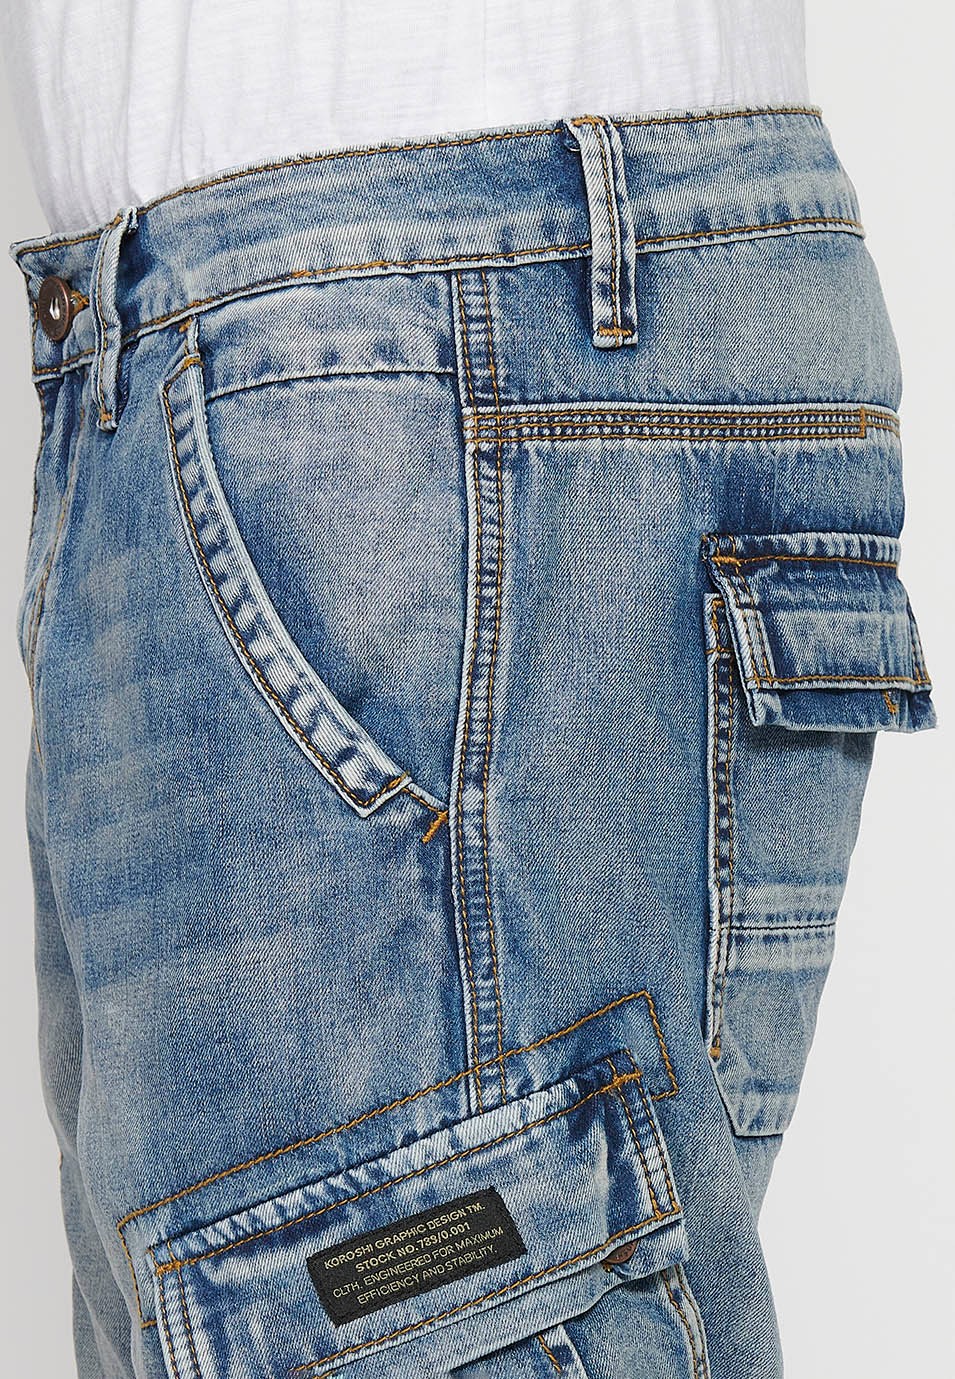 Denim Bermuda cargo shorts with front zipper and button closure with five pockets, one blue pocket pocket for Men 6